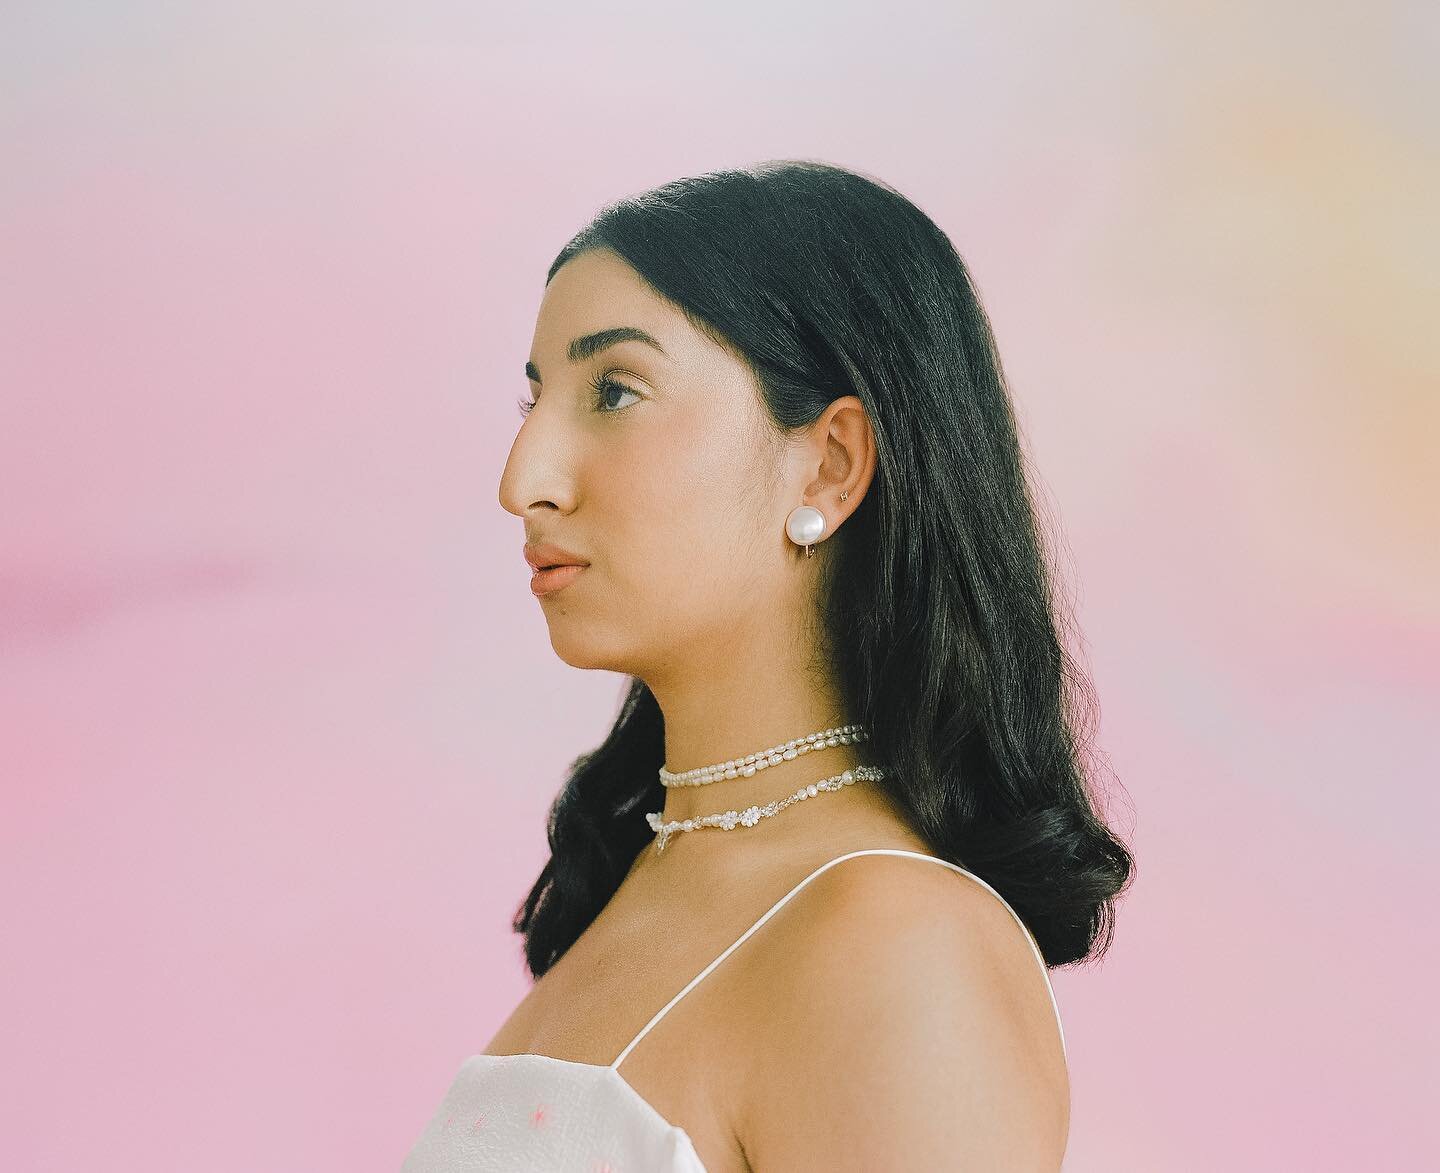 @amirajazeera ✨such an amazing profile
Shot on 120 film

Amira Jazeera (she/her)
Growing up Palestinian in America, Amira didn&rsquo;t see the representation that made her feel seen. This influenced her to pursue a career in music to be an example to